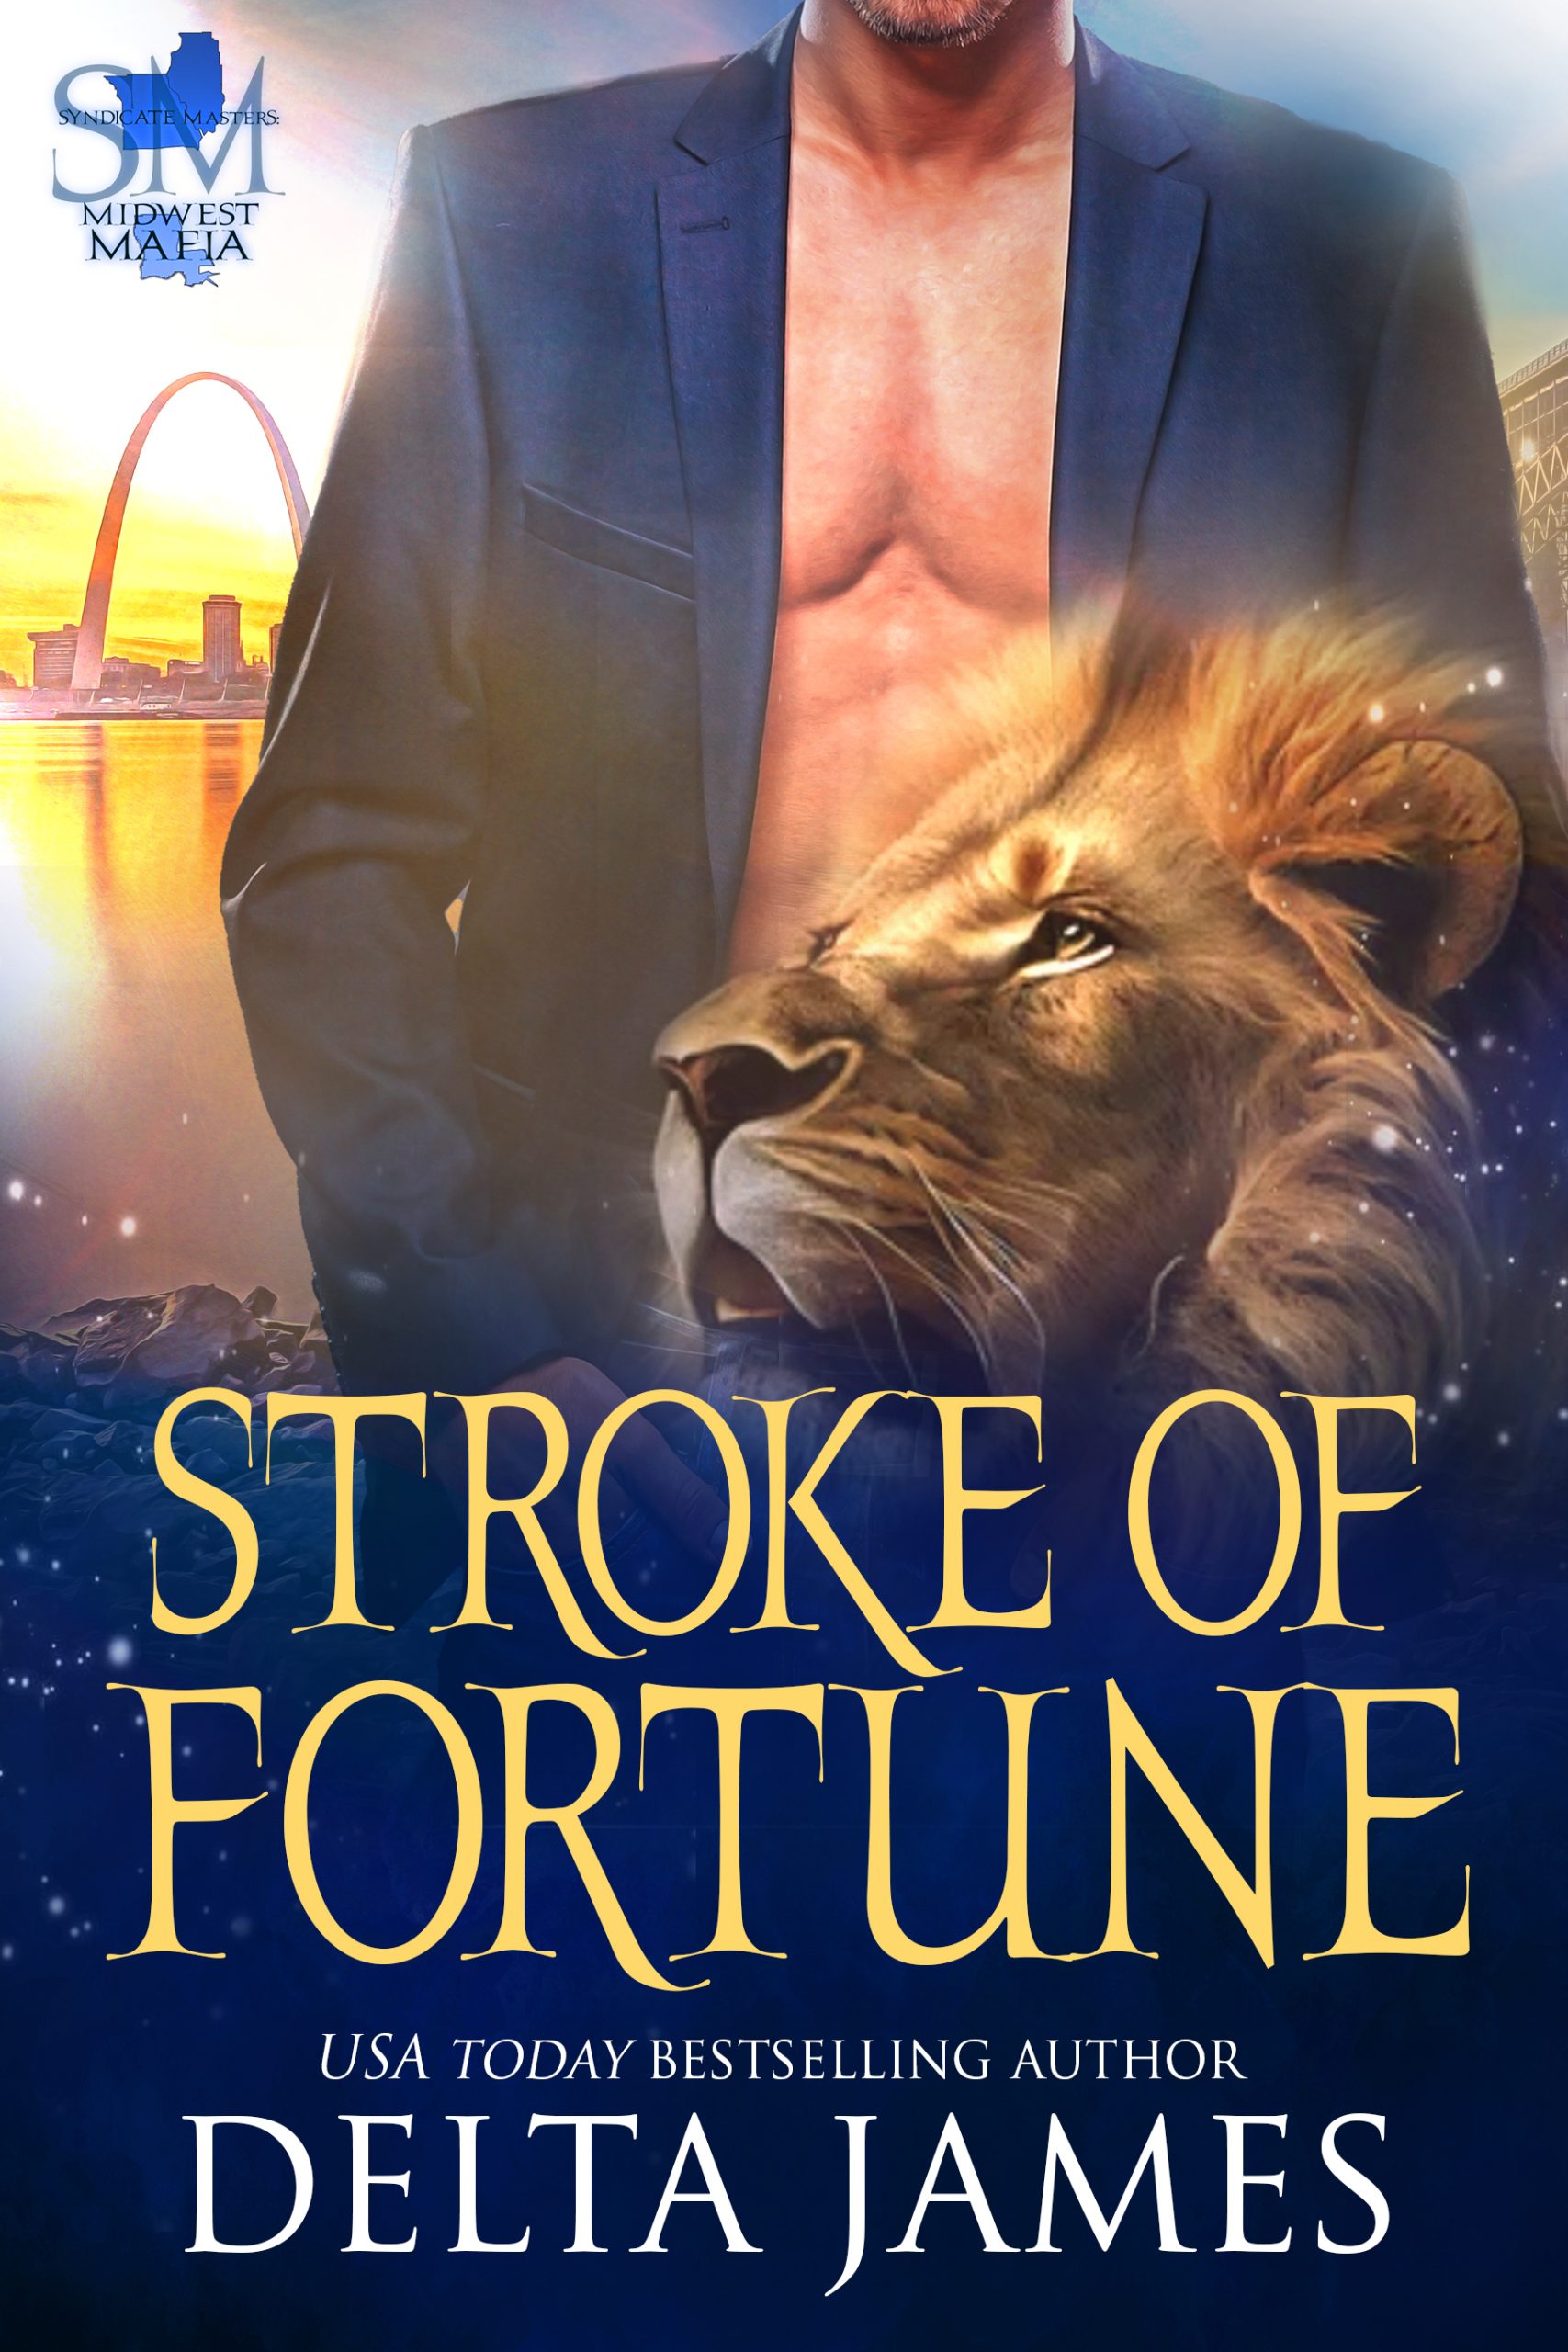 Stroke of Fortune by Delta James PDF Download Video Library